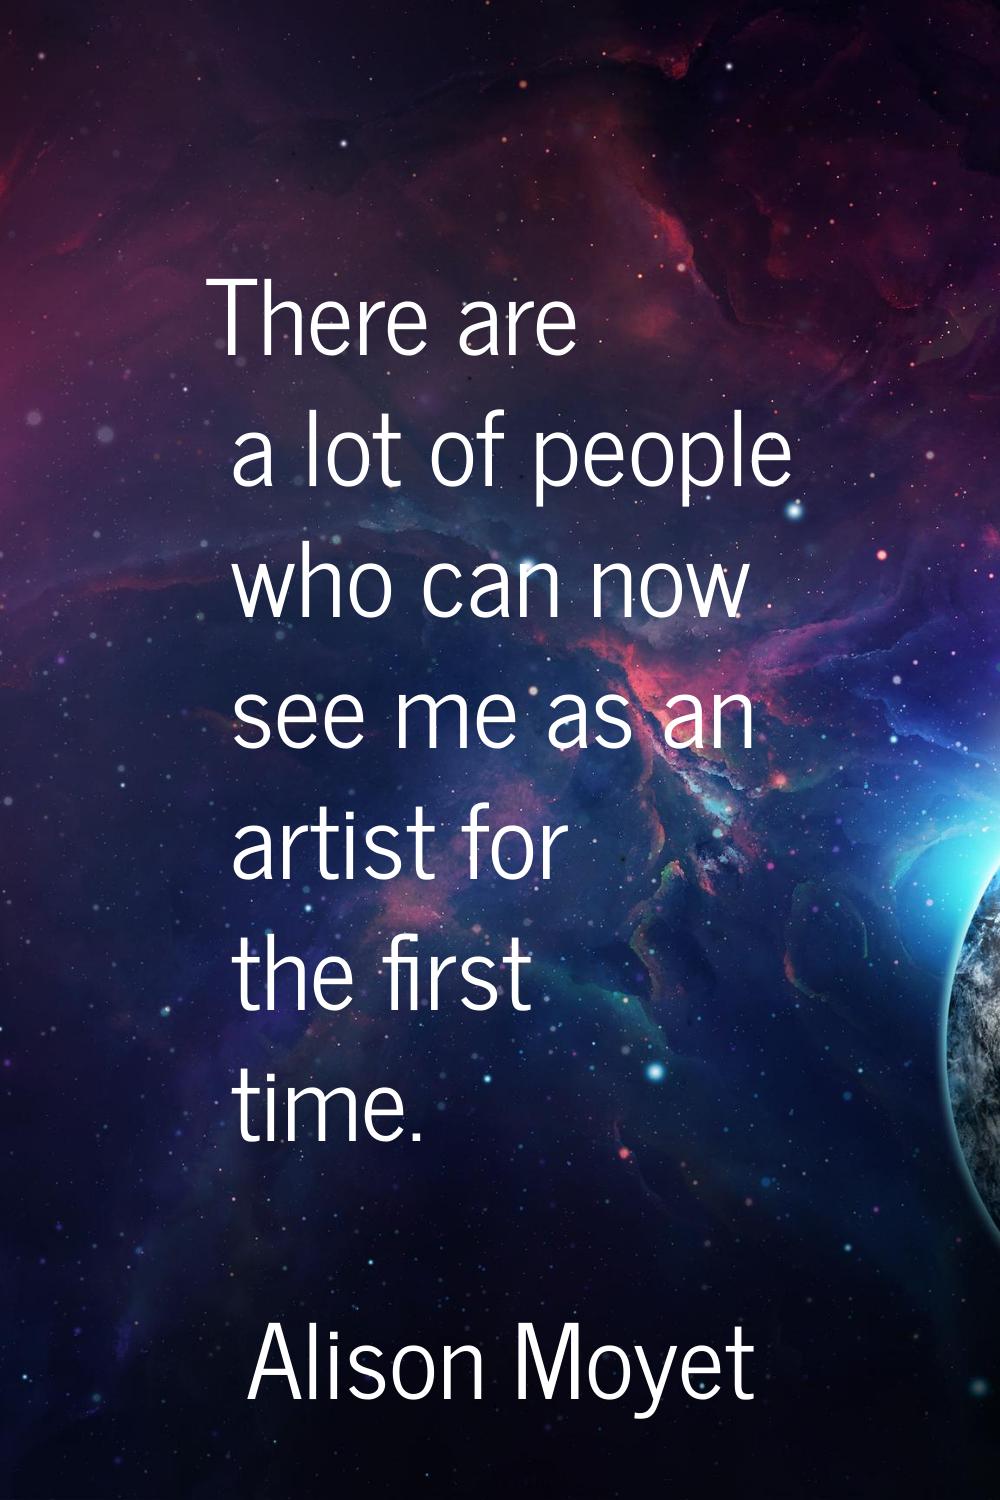 There are a lot of people who can now see me as an artist for the first time.